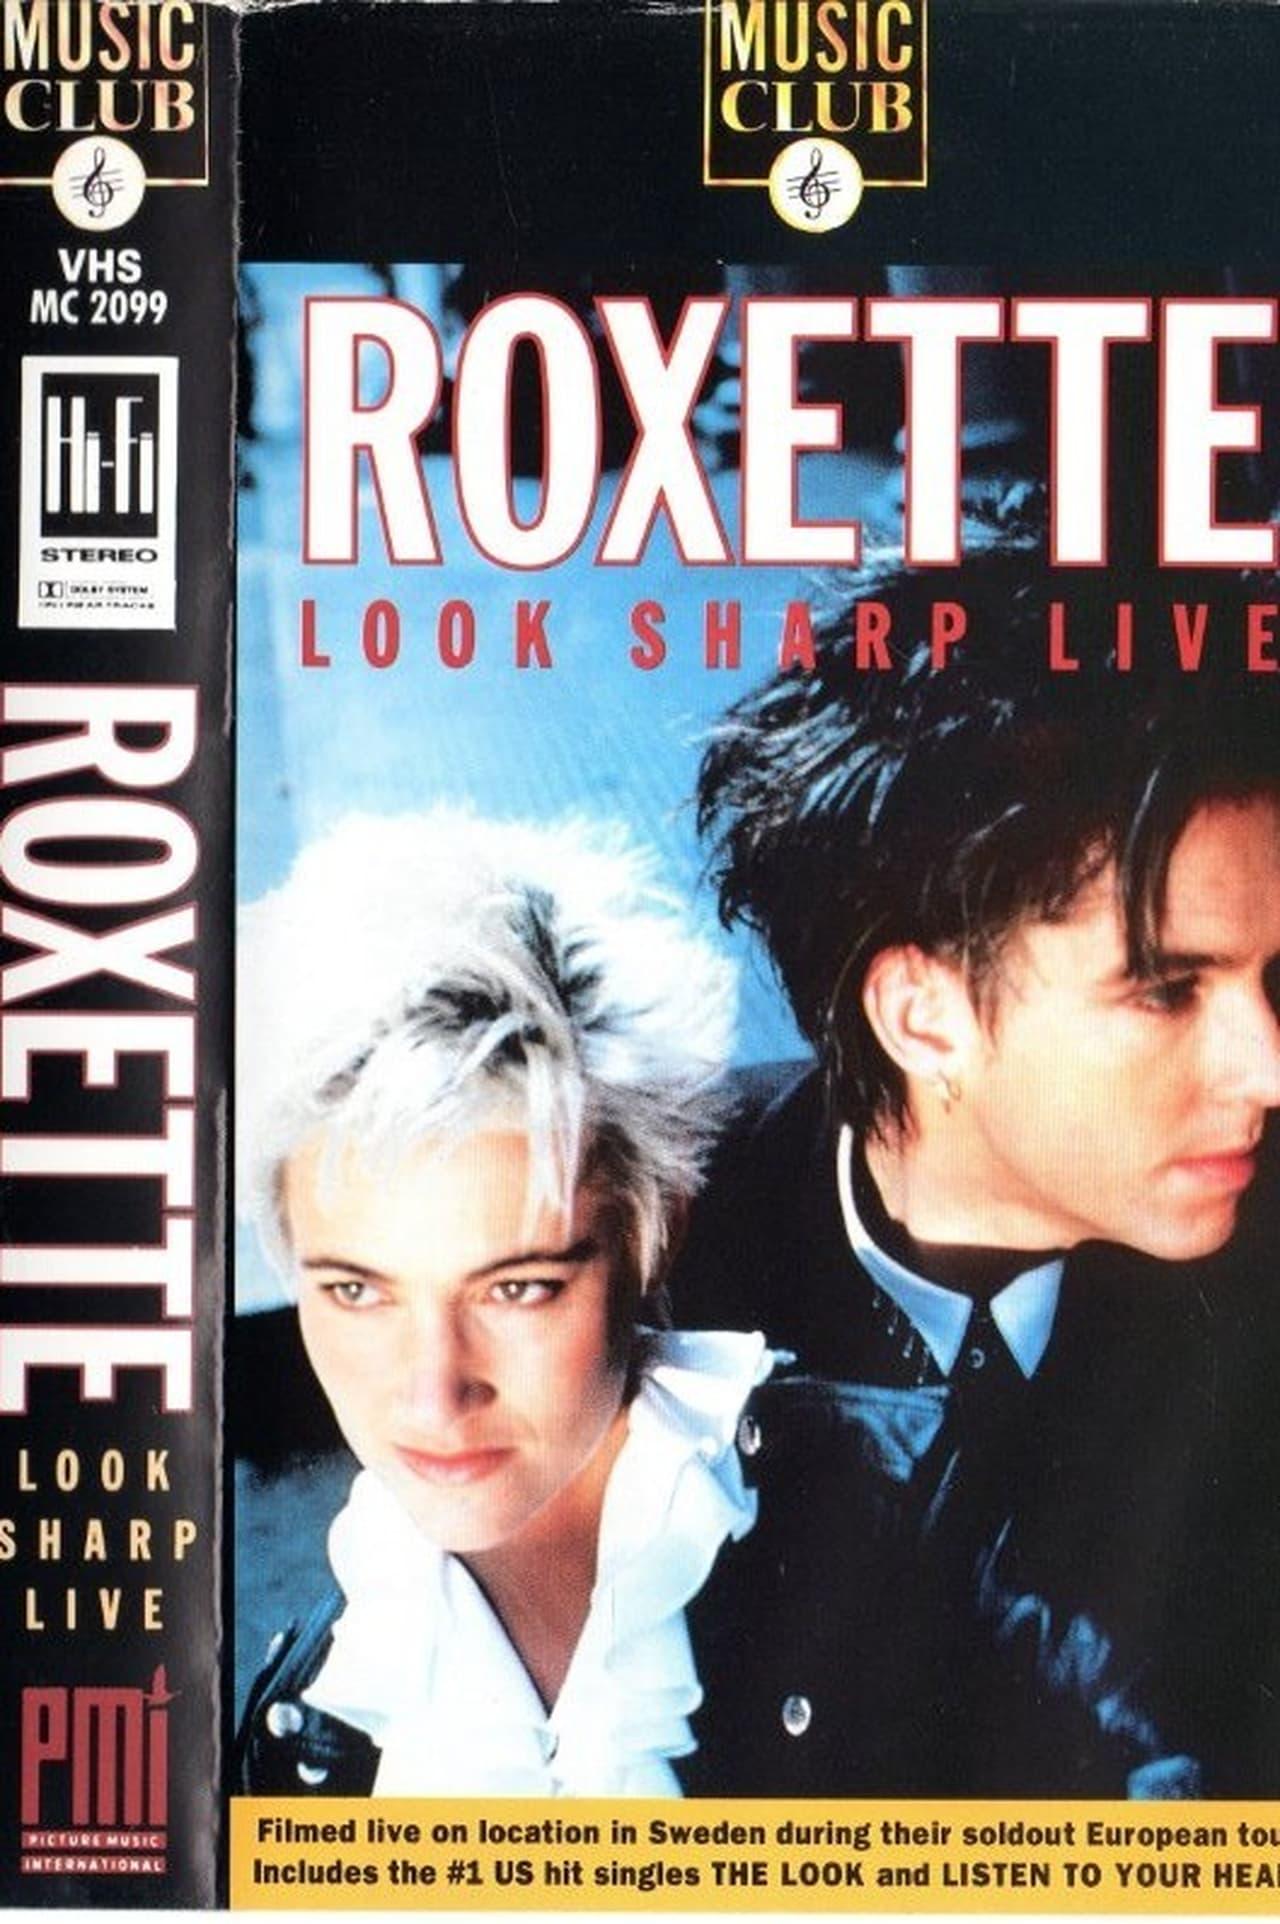 Roxette: Look Sharp Live 1989 poster